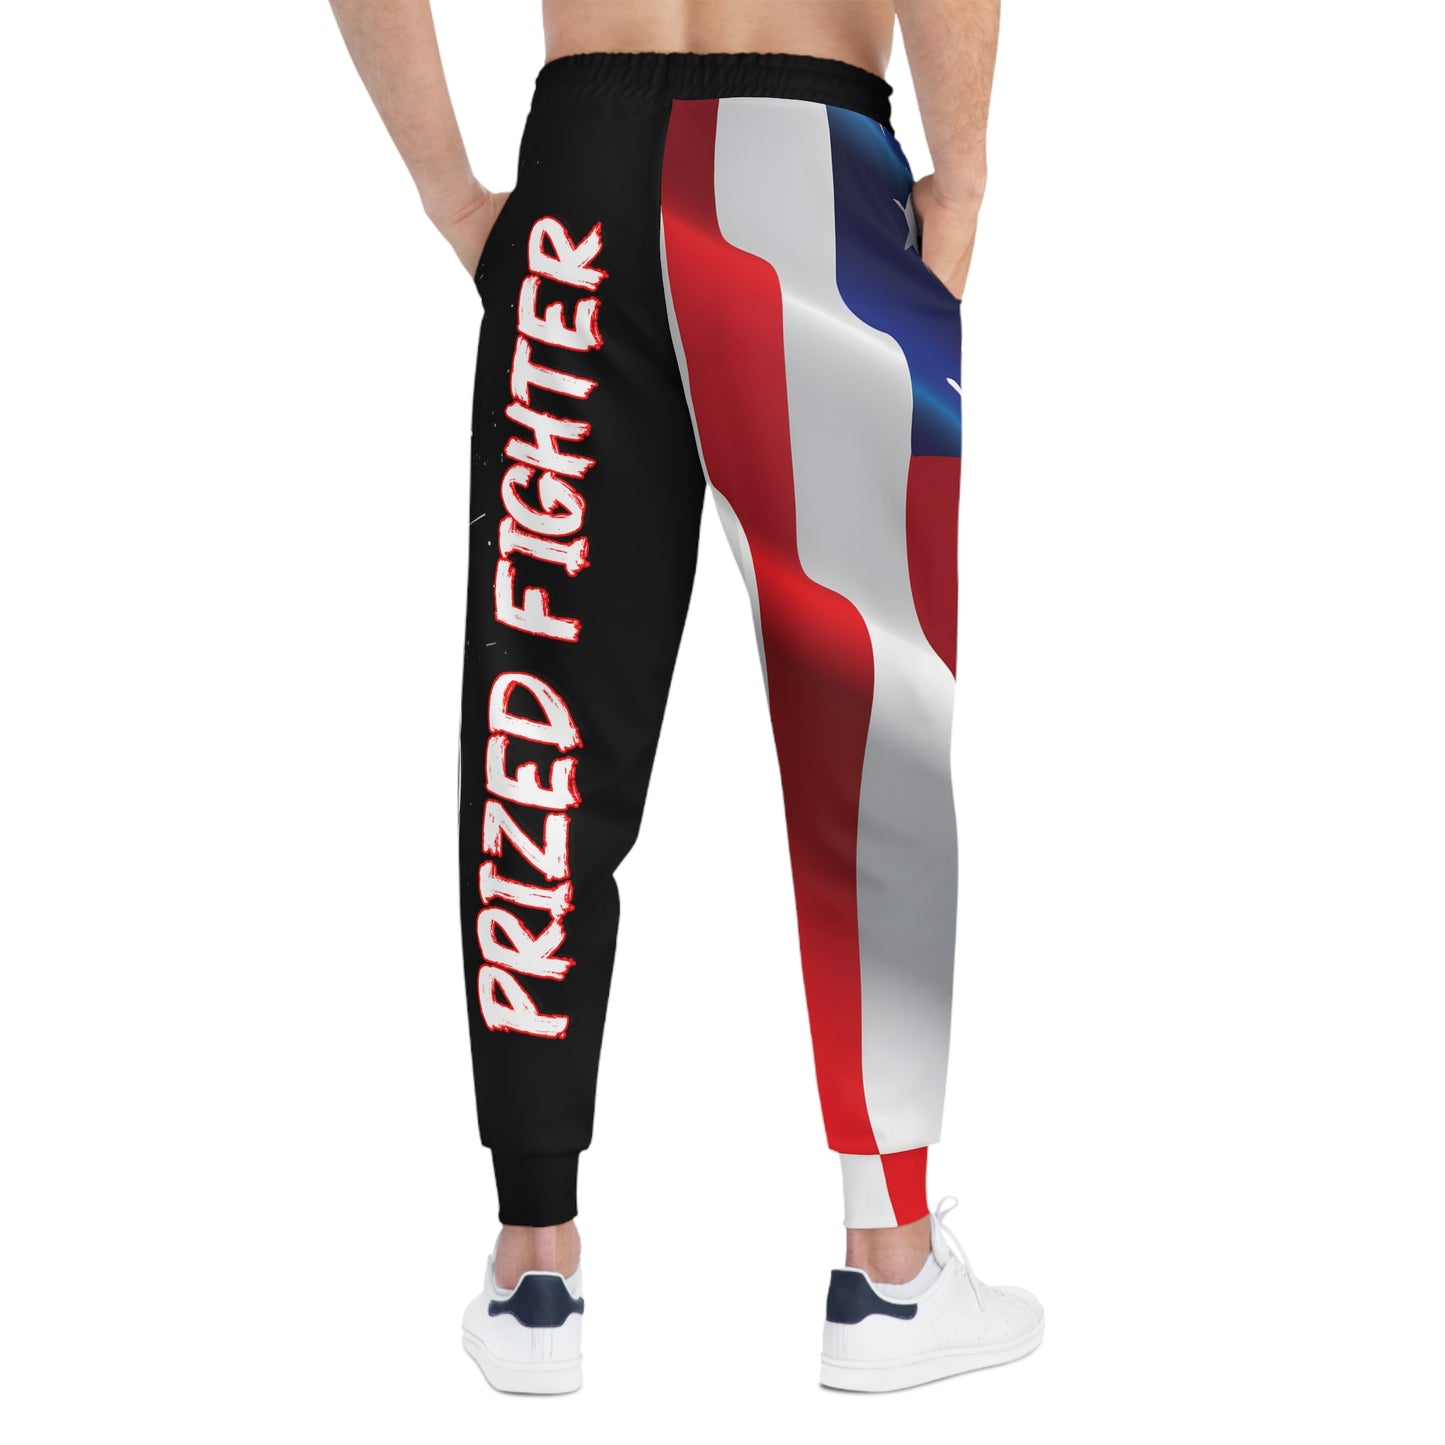 Kǎtōng Piàn - Prized Fighter Collection - America - 001 - Athletic Joggers